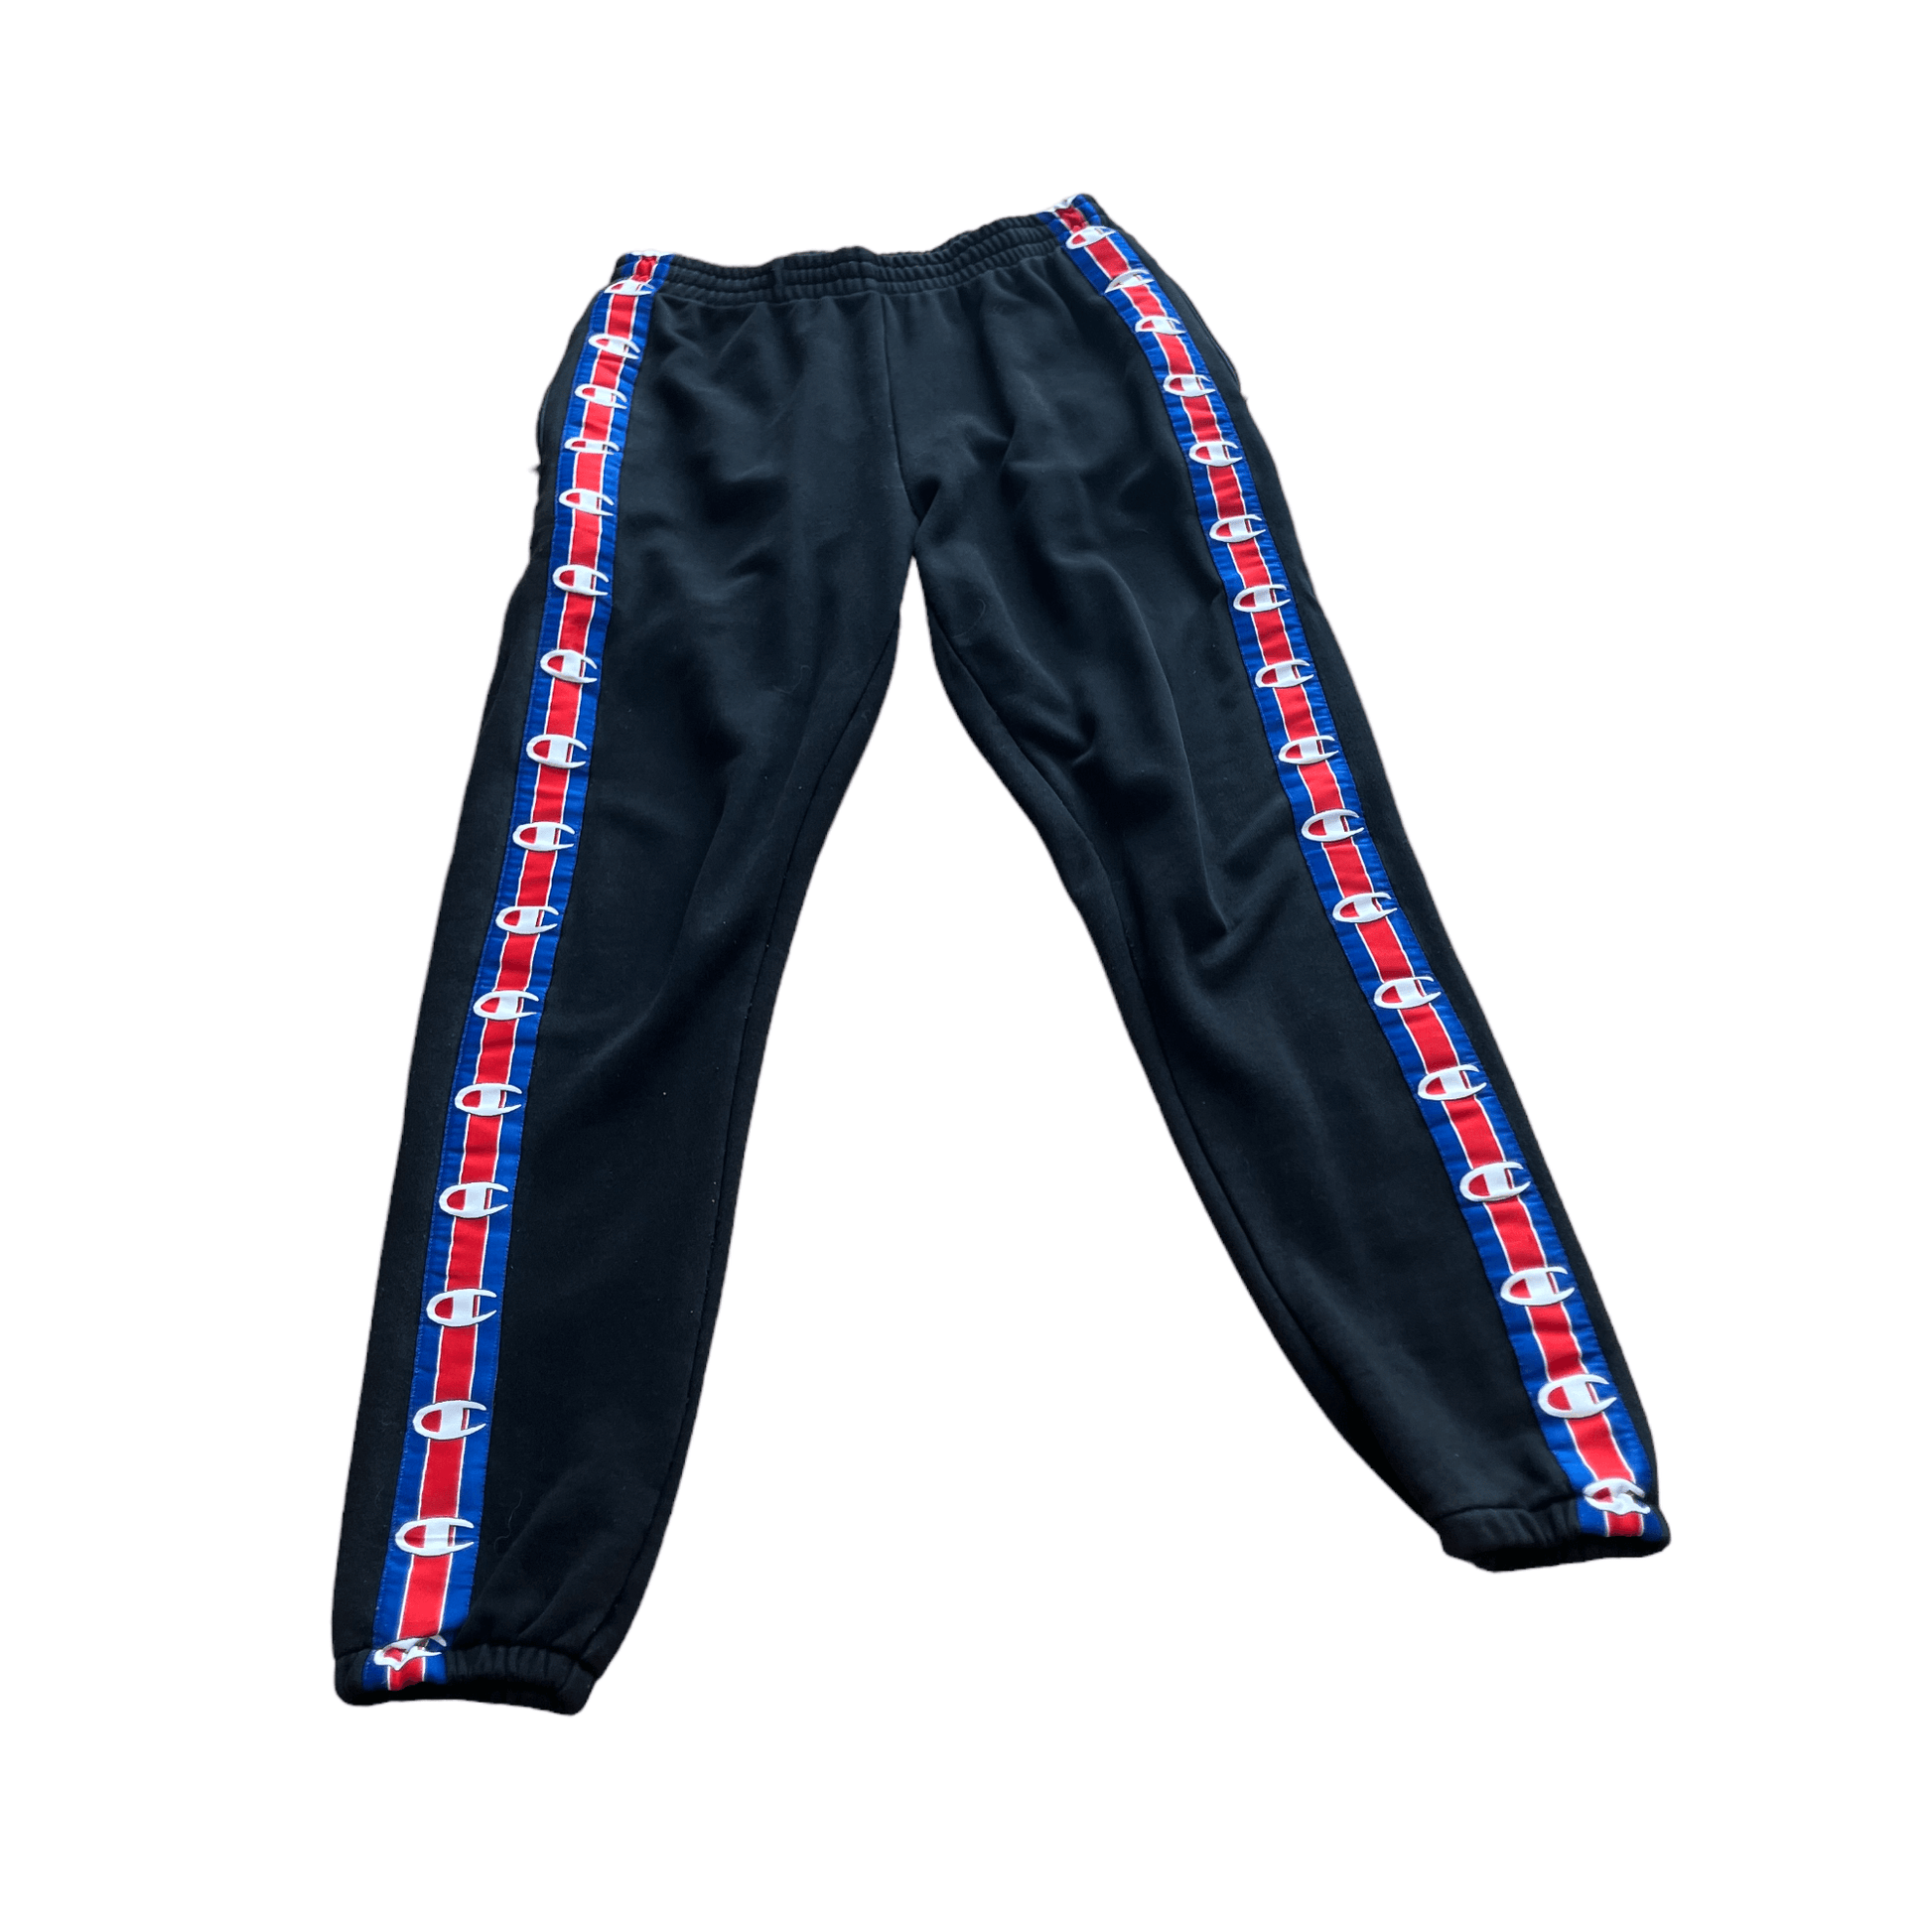 Black Vetements x Champion Joggers - Recommended Size - Large - The Streetwear Studio